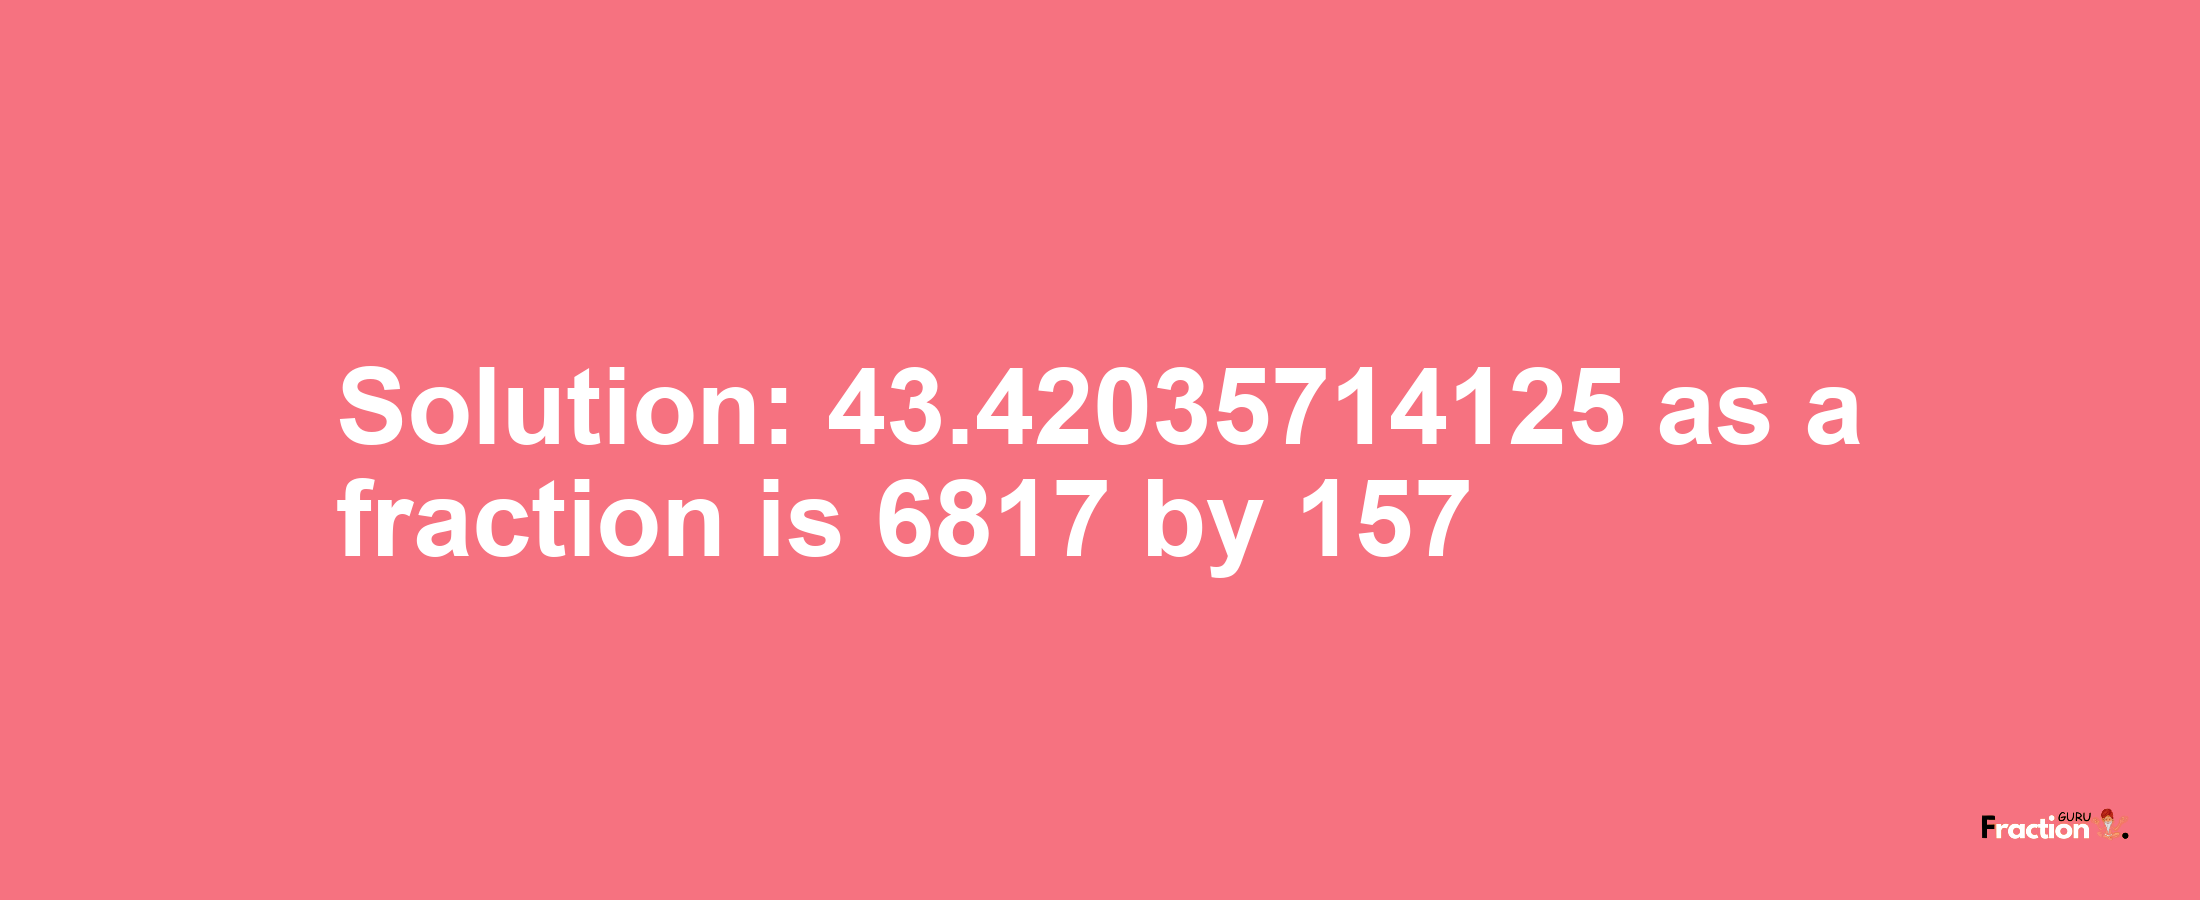 Solution:43.42035714125 as a fraction is 6817/157